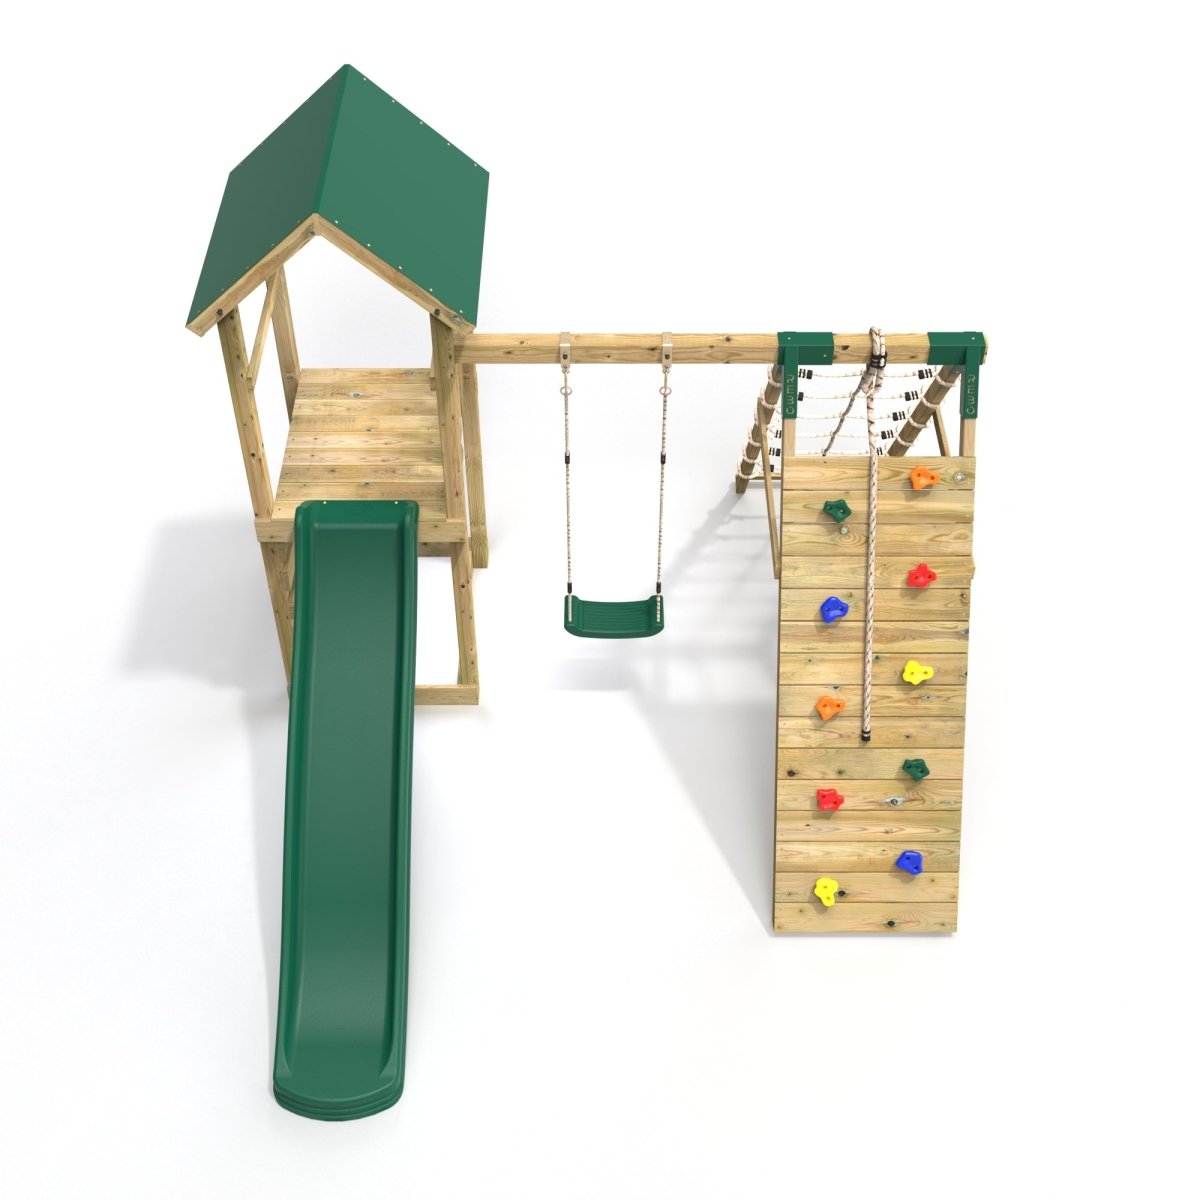 Rebo Challenge Wooden Climbing Frame with Swings, Slide and Up & over Climbing wall - Bear